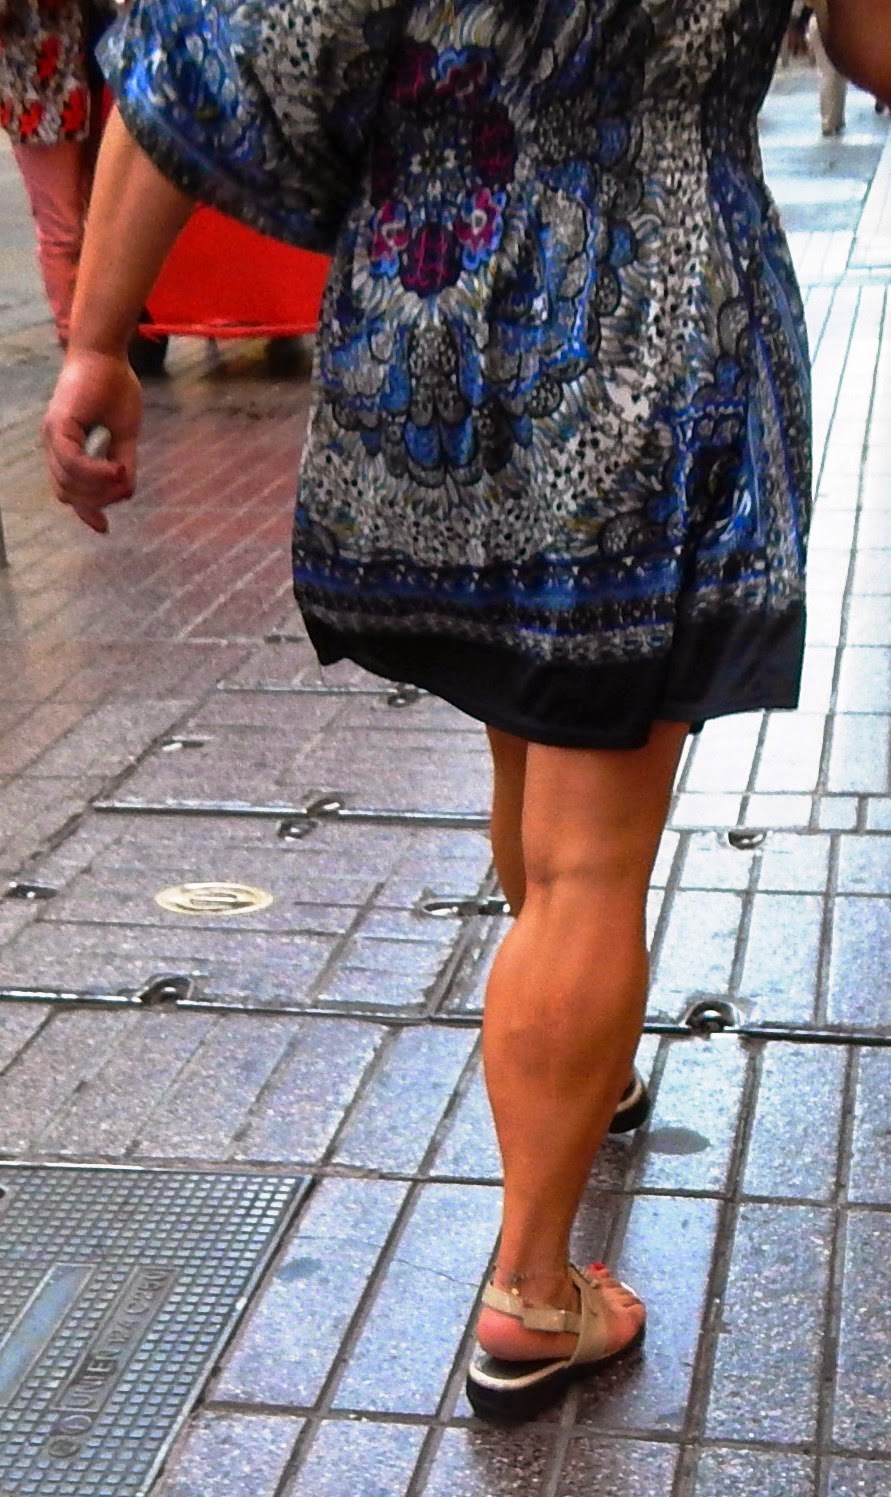 Her Calves Muscle Legs: Street Snapshots of Large Calf Muscle Woman